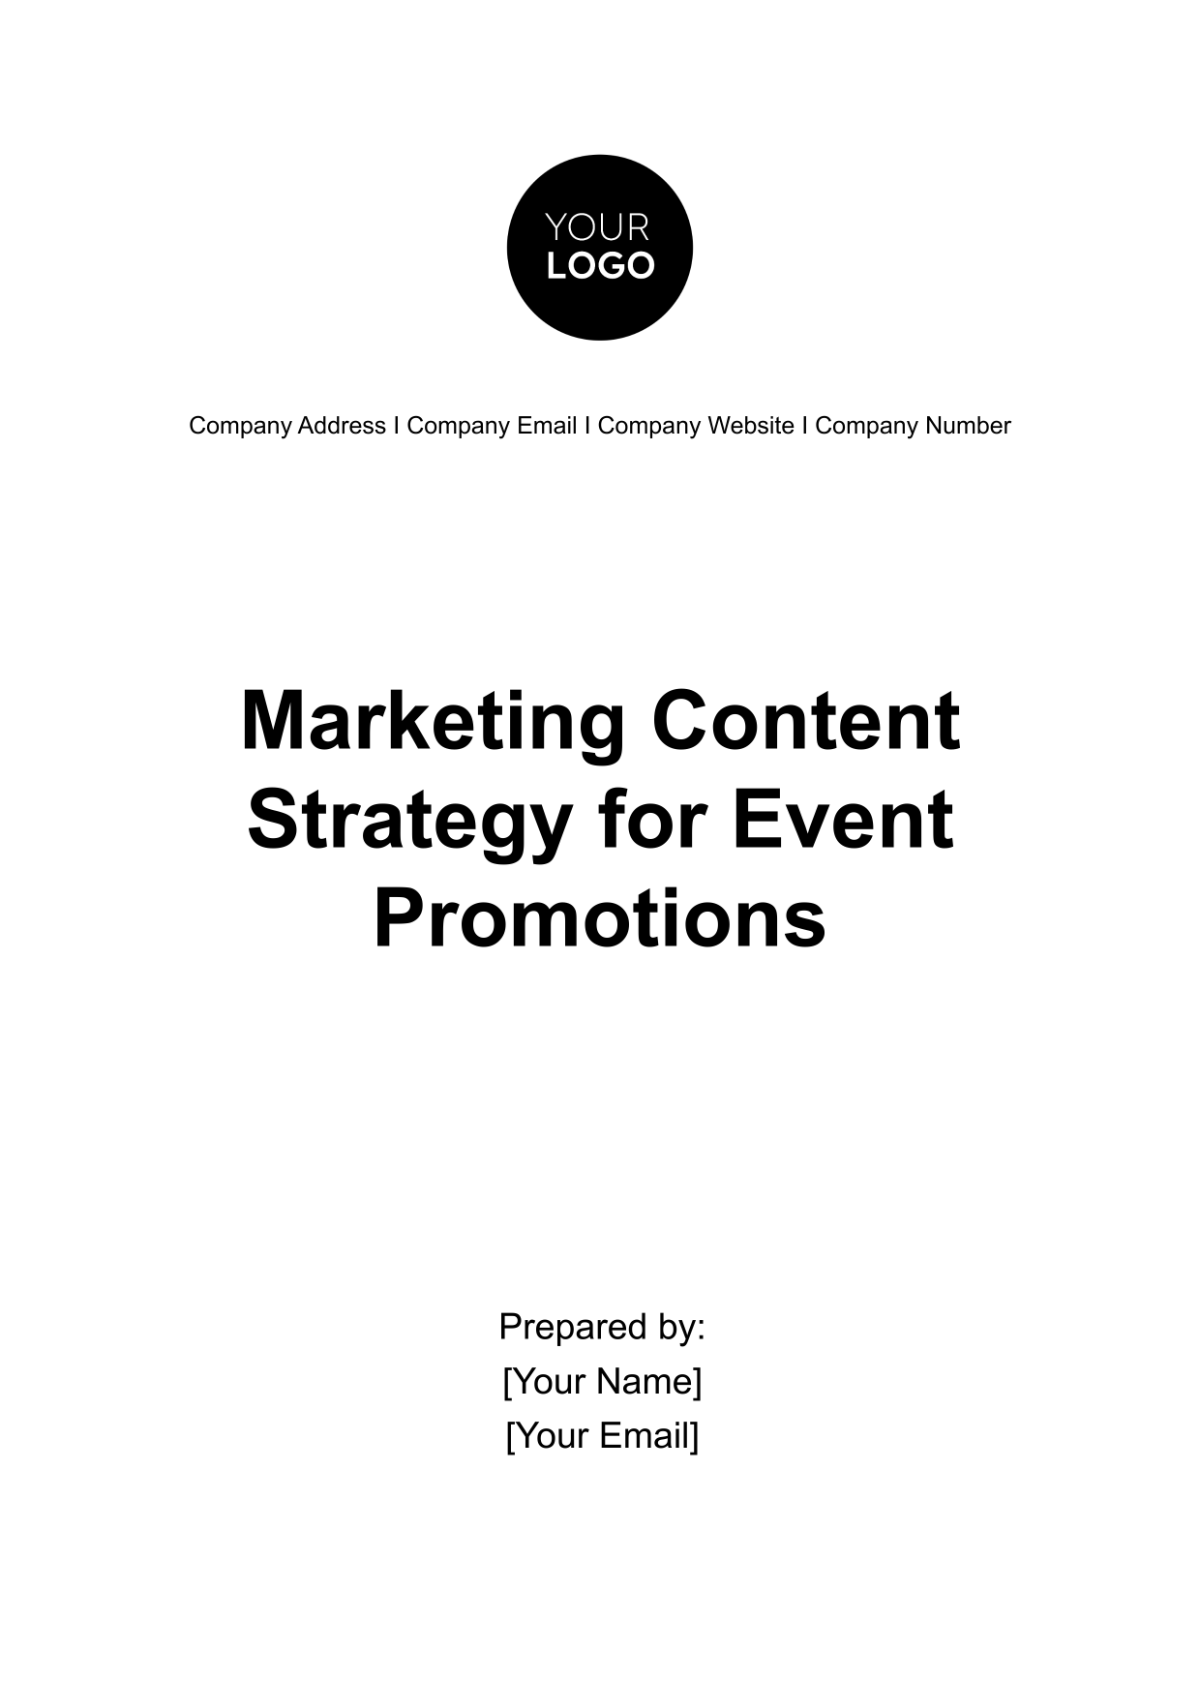 Marketing Content Strategy for Event Promotions Template